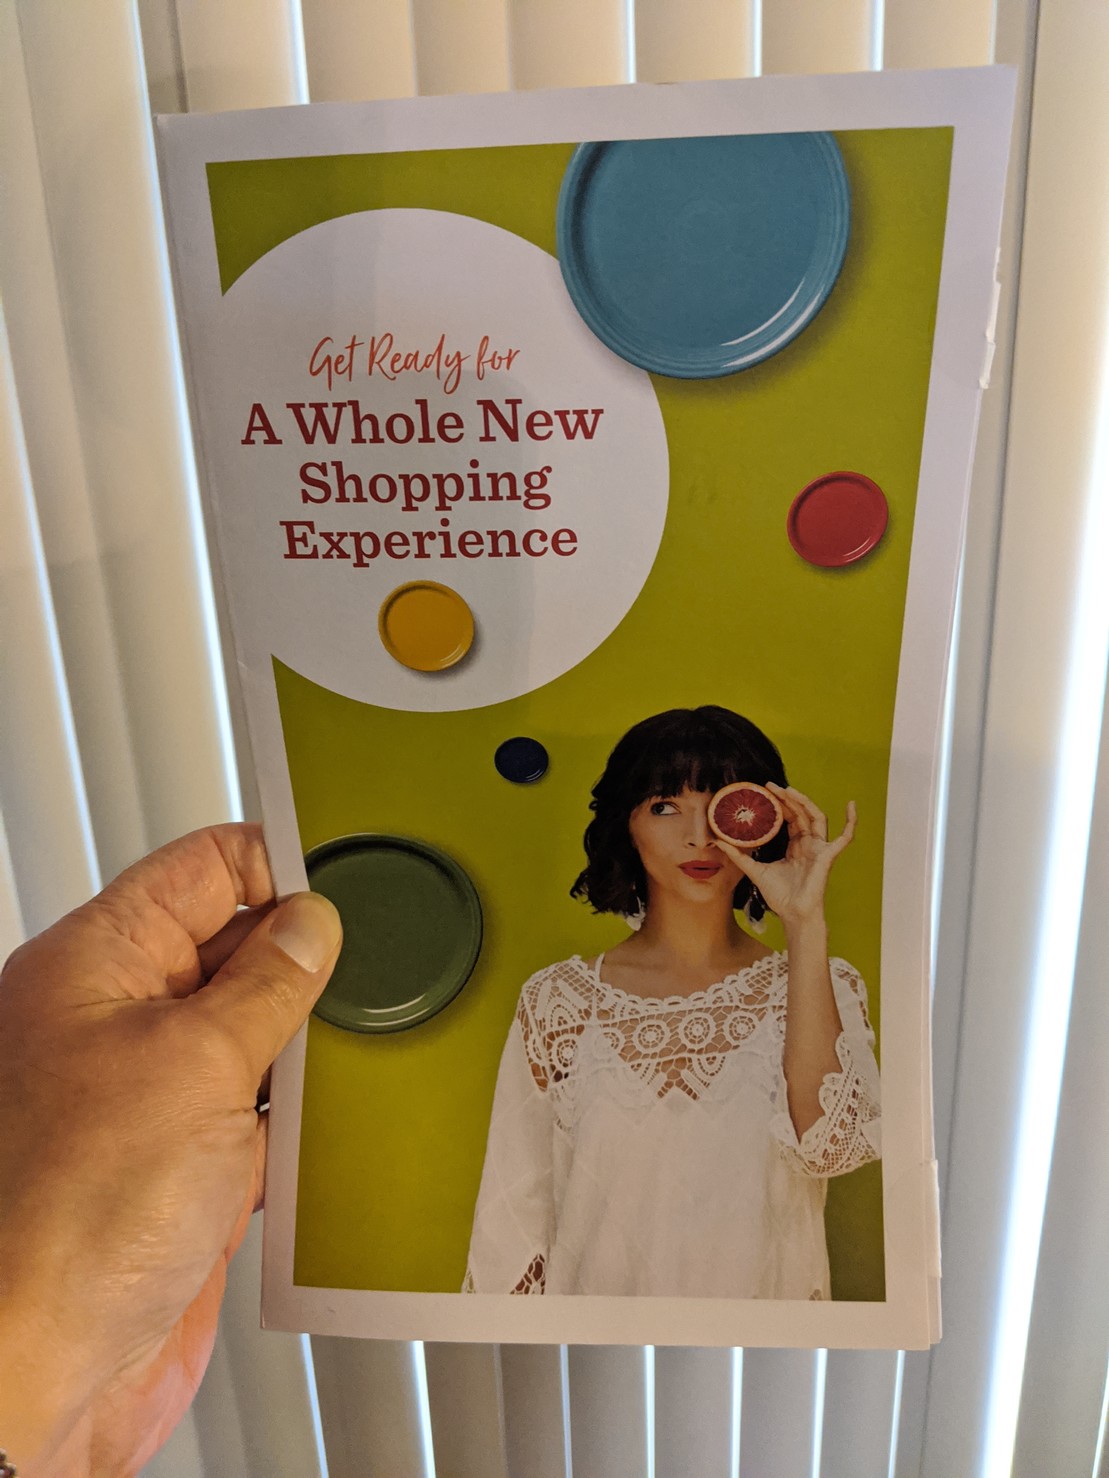 Paper advertisement plugging "A whole new shopping experience."